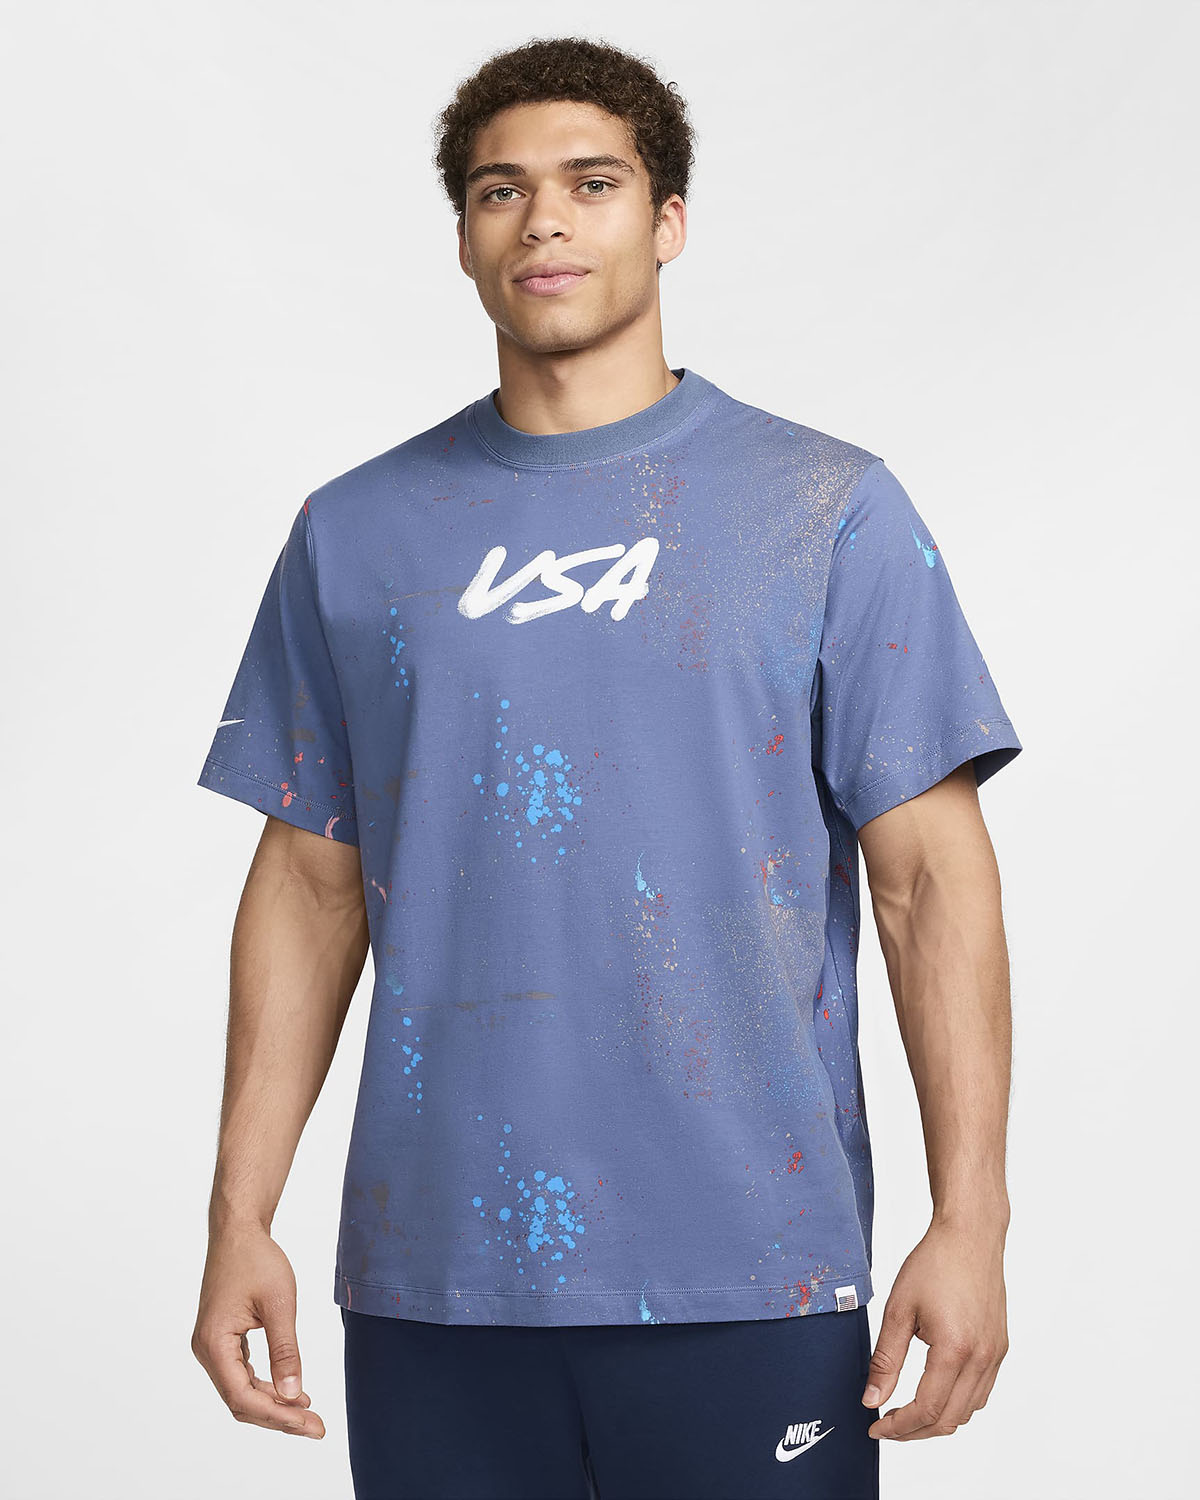 NIke USA Breaking T Shirt Diffused Blue